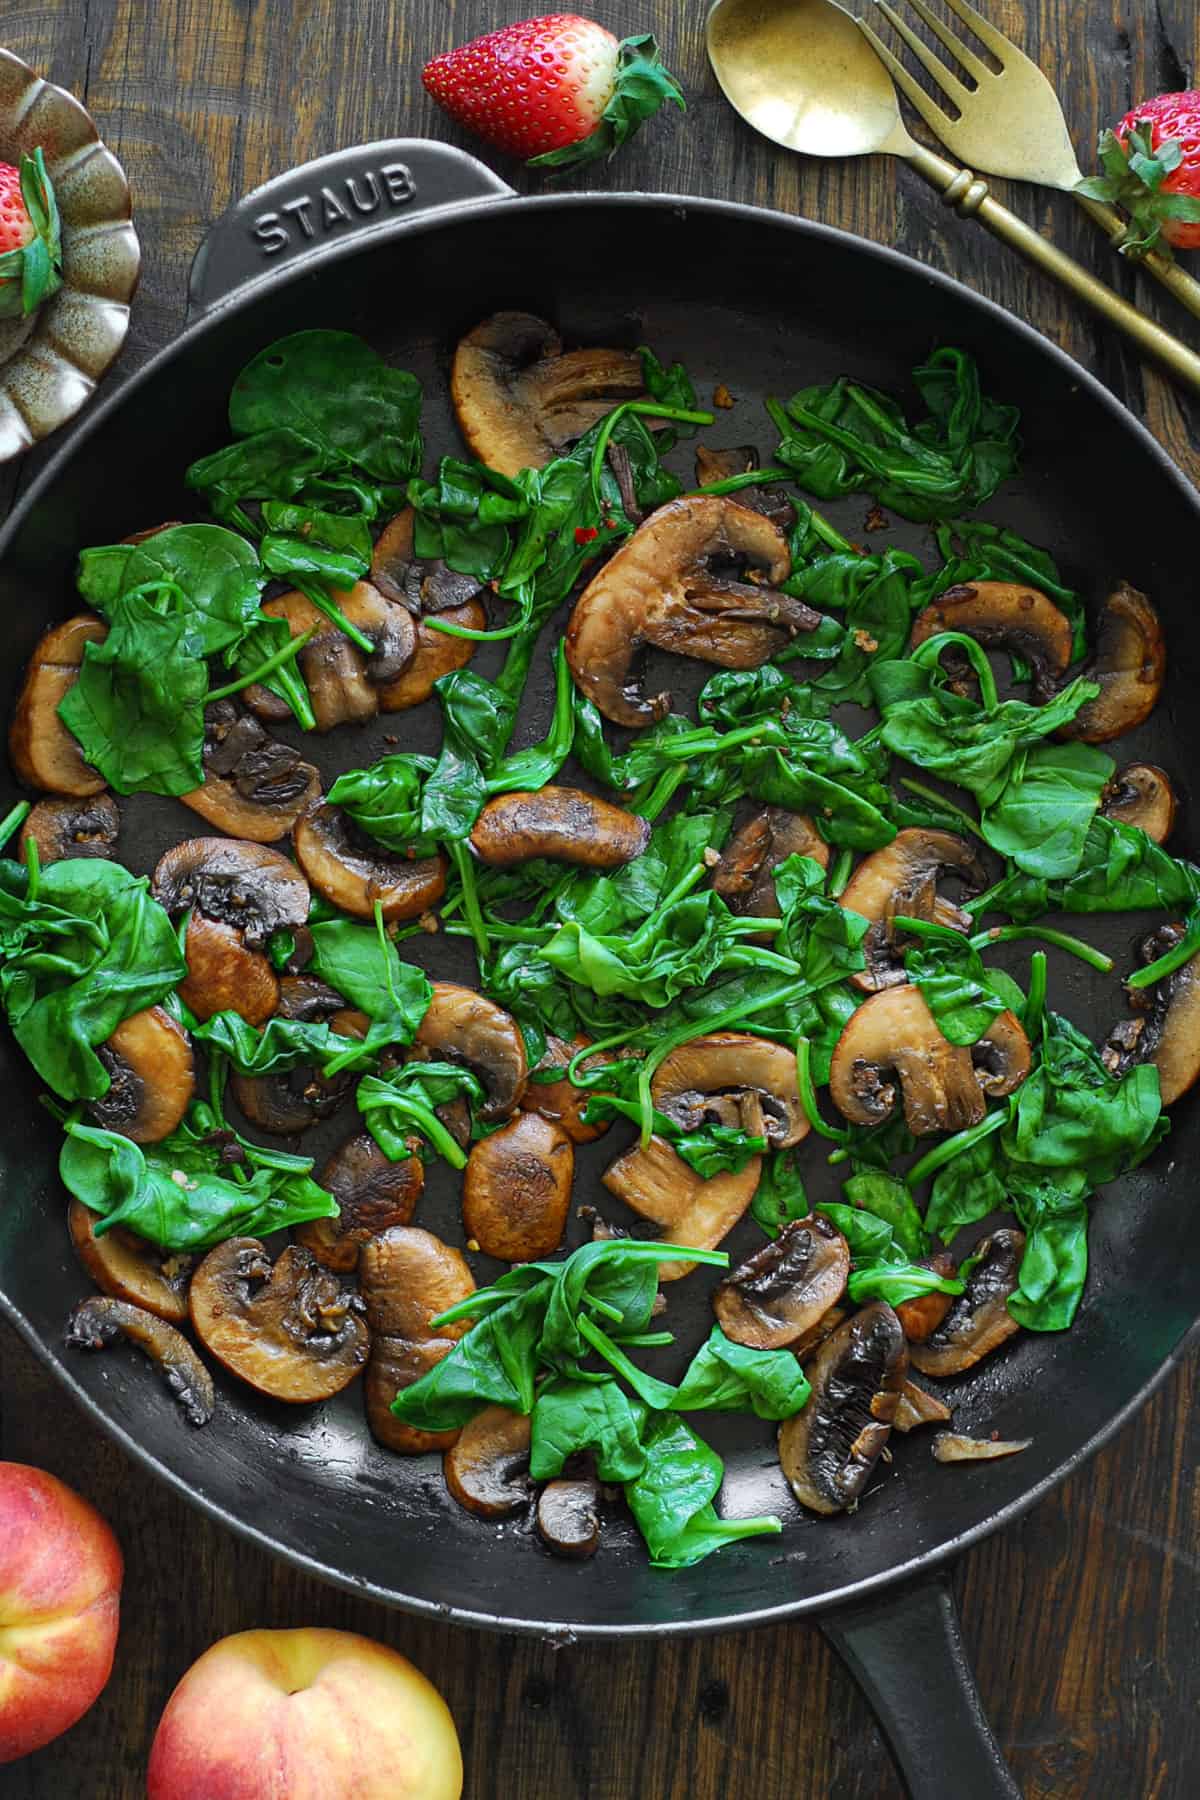 cooked mushrooms and spinach in a cast iron skillet.